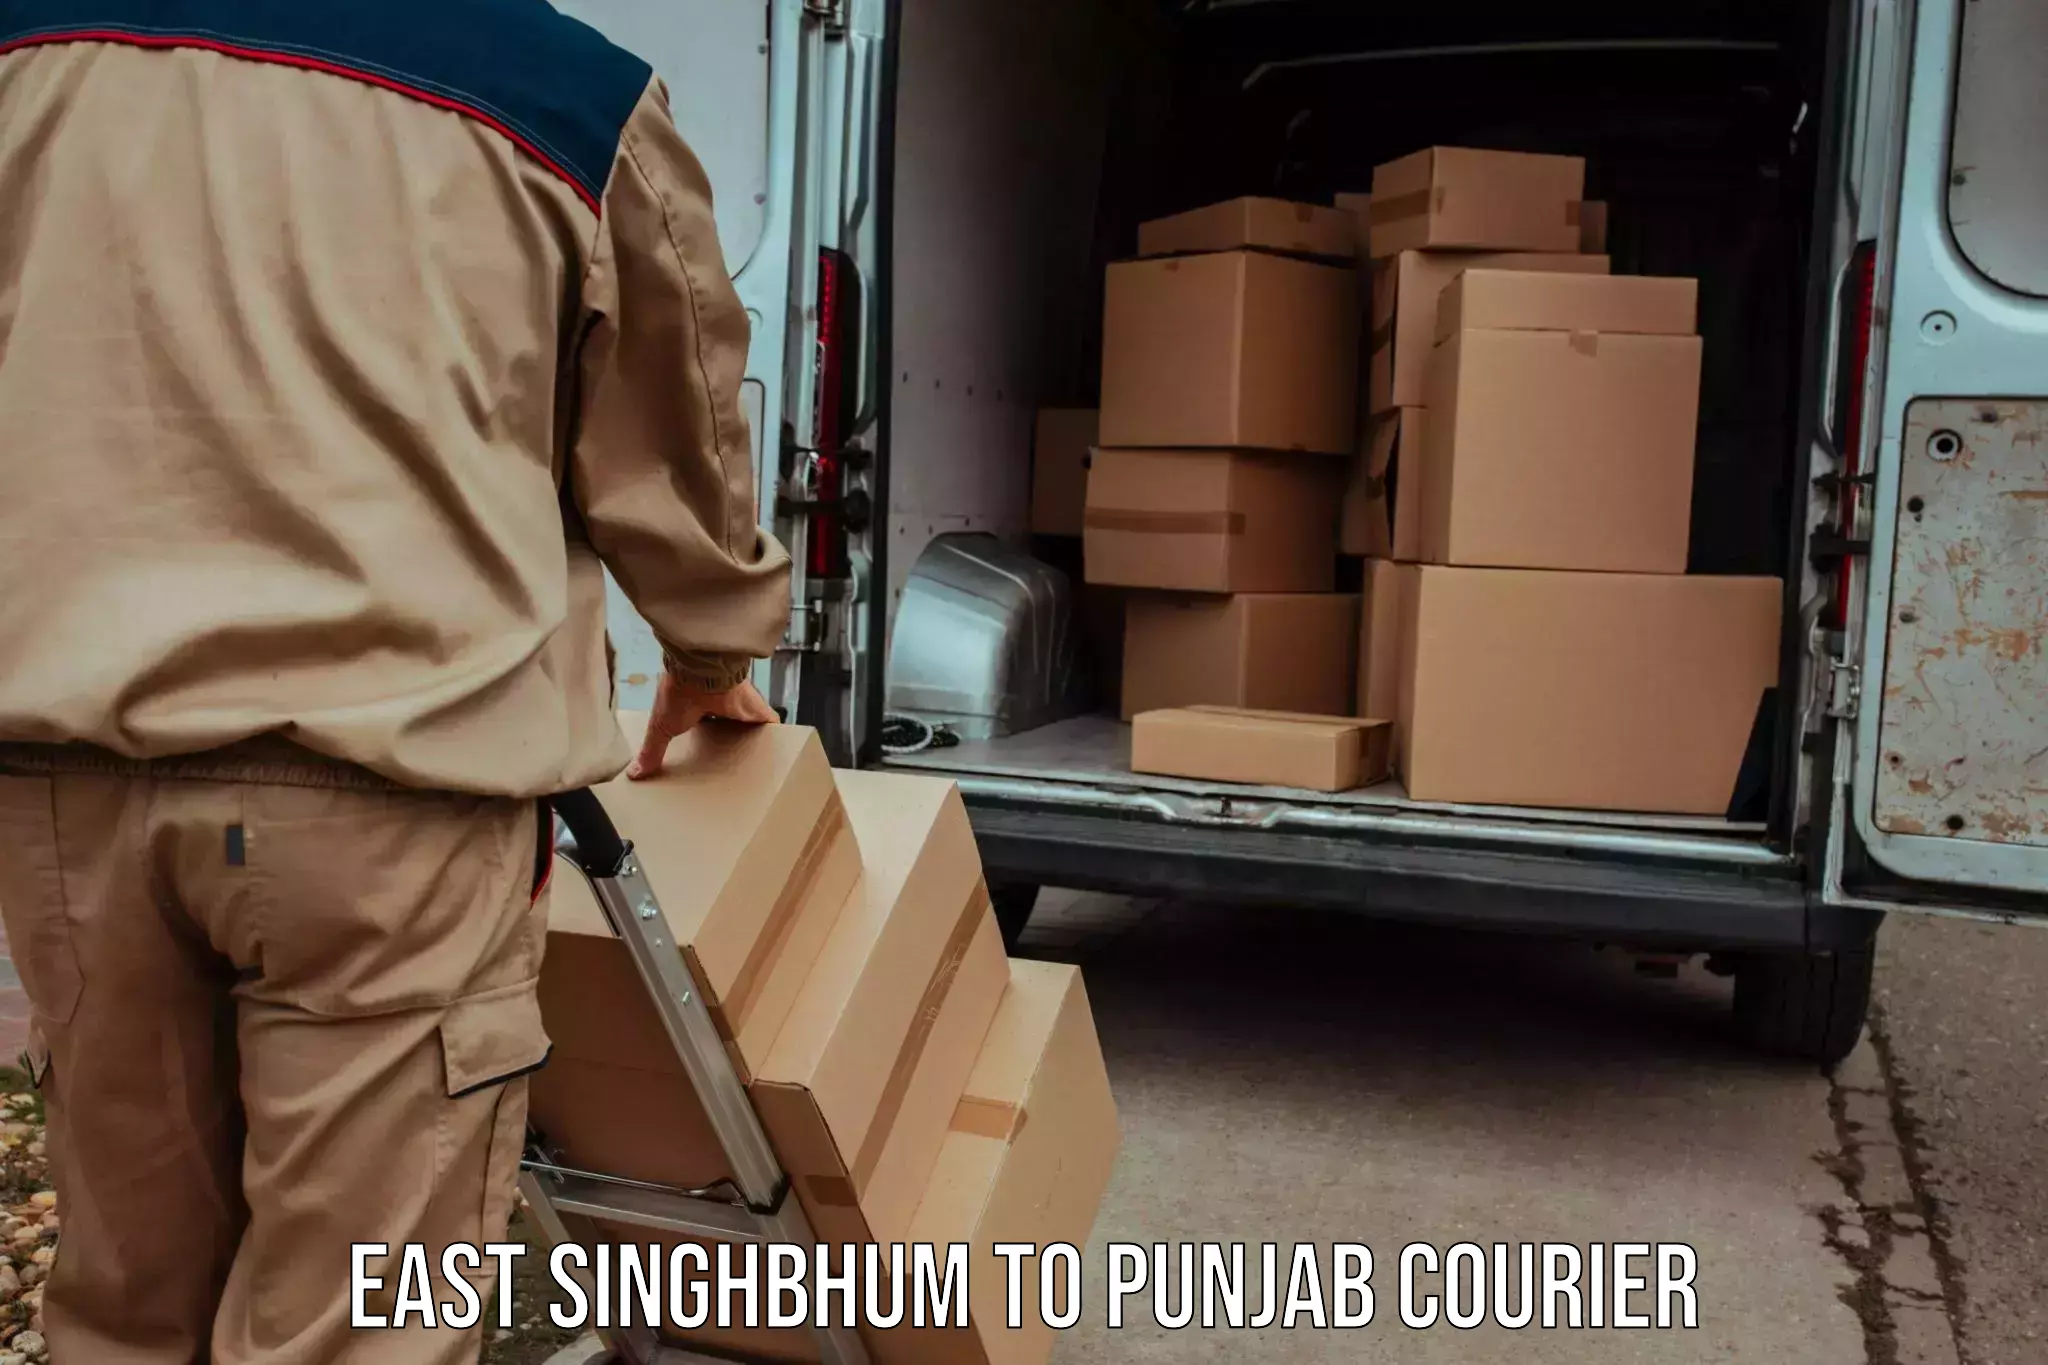 User-friendly delivery service East Singhbhum to Fatehgarh Sahib